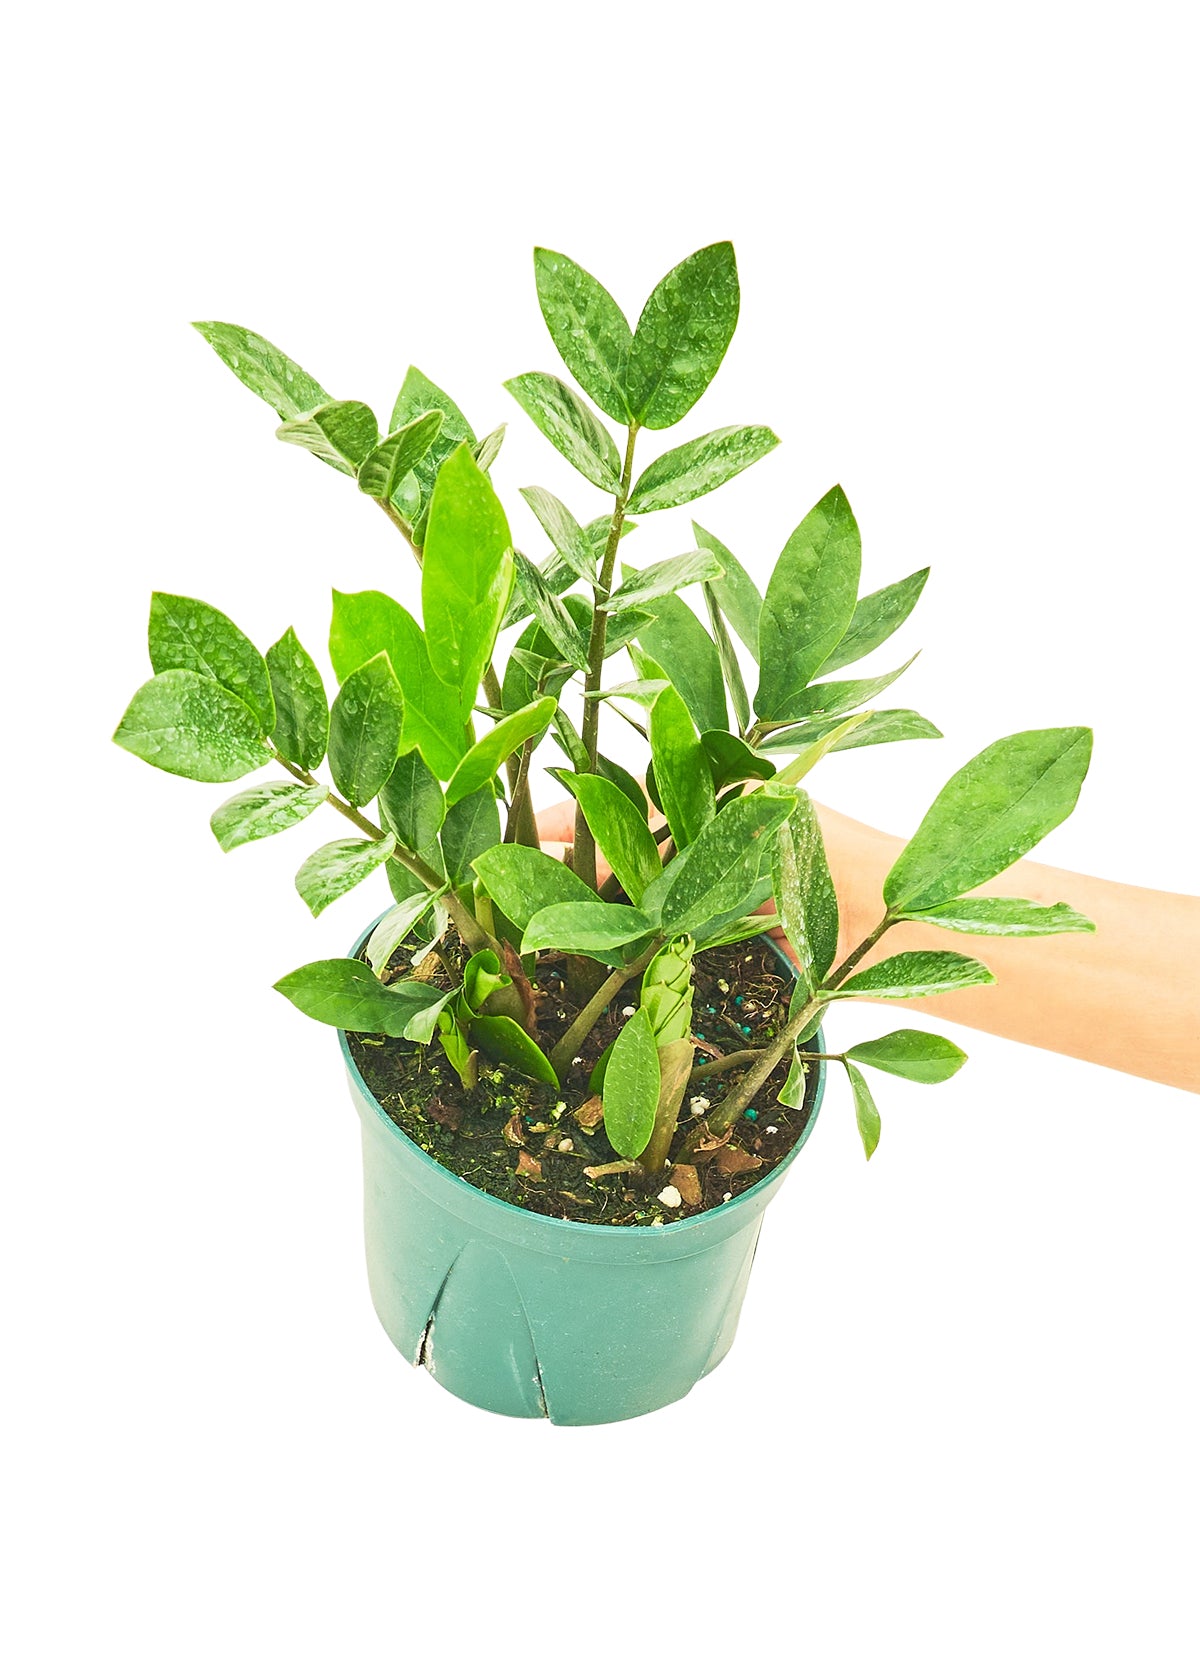 Medium Sized ZZ Plant in a growers pot with a white background with a hand holding the pot to show the top view